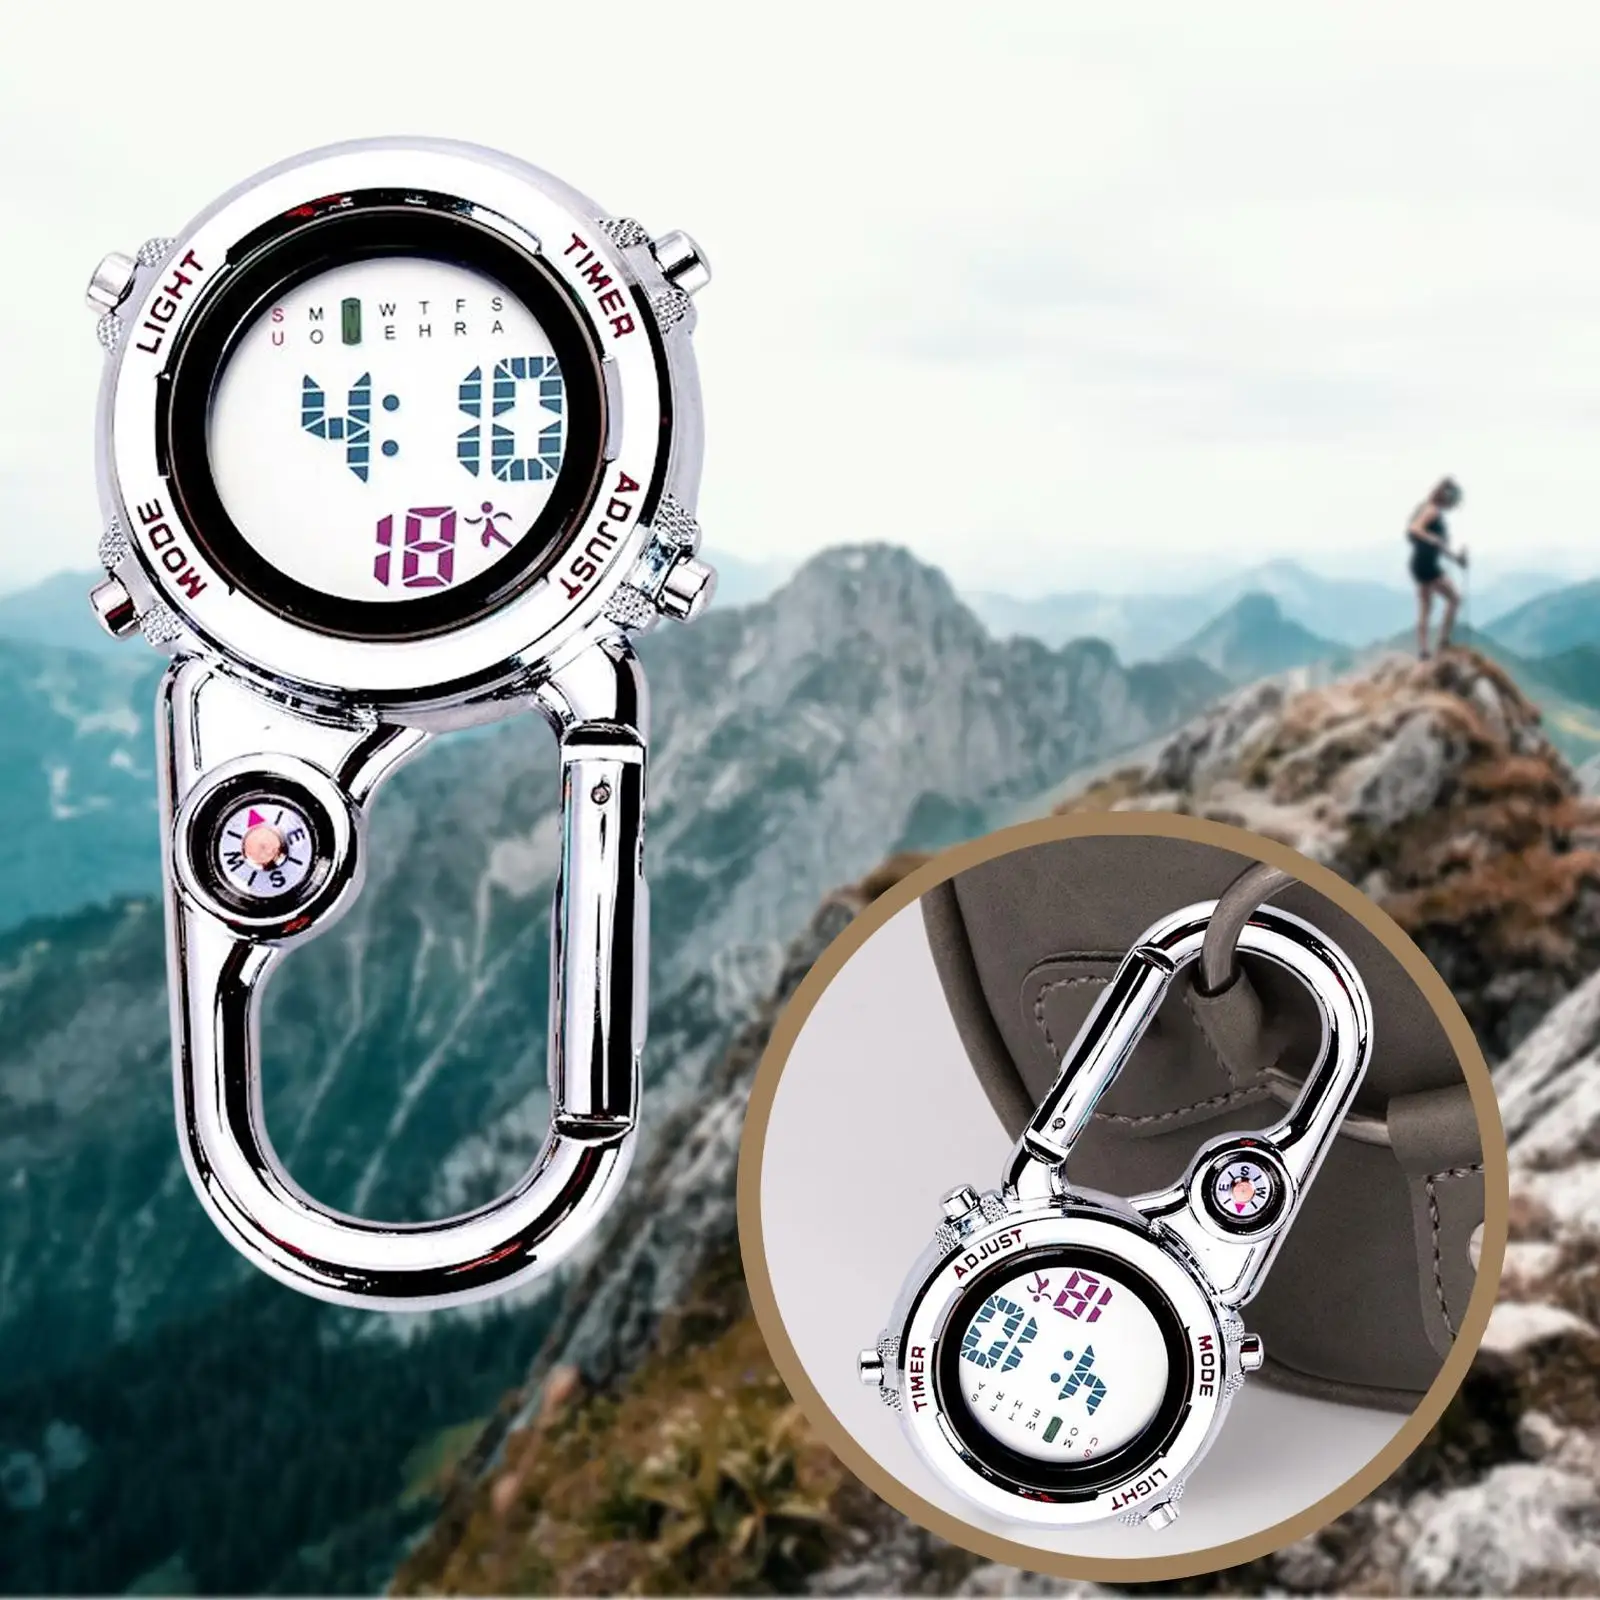 Multi Function Digital Carabiner Watch Unisex Pocket Watch Backpack Fob Watch for Work Chefs